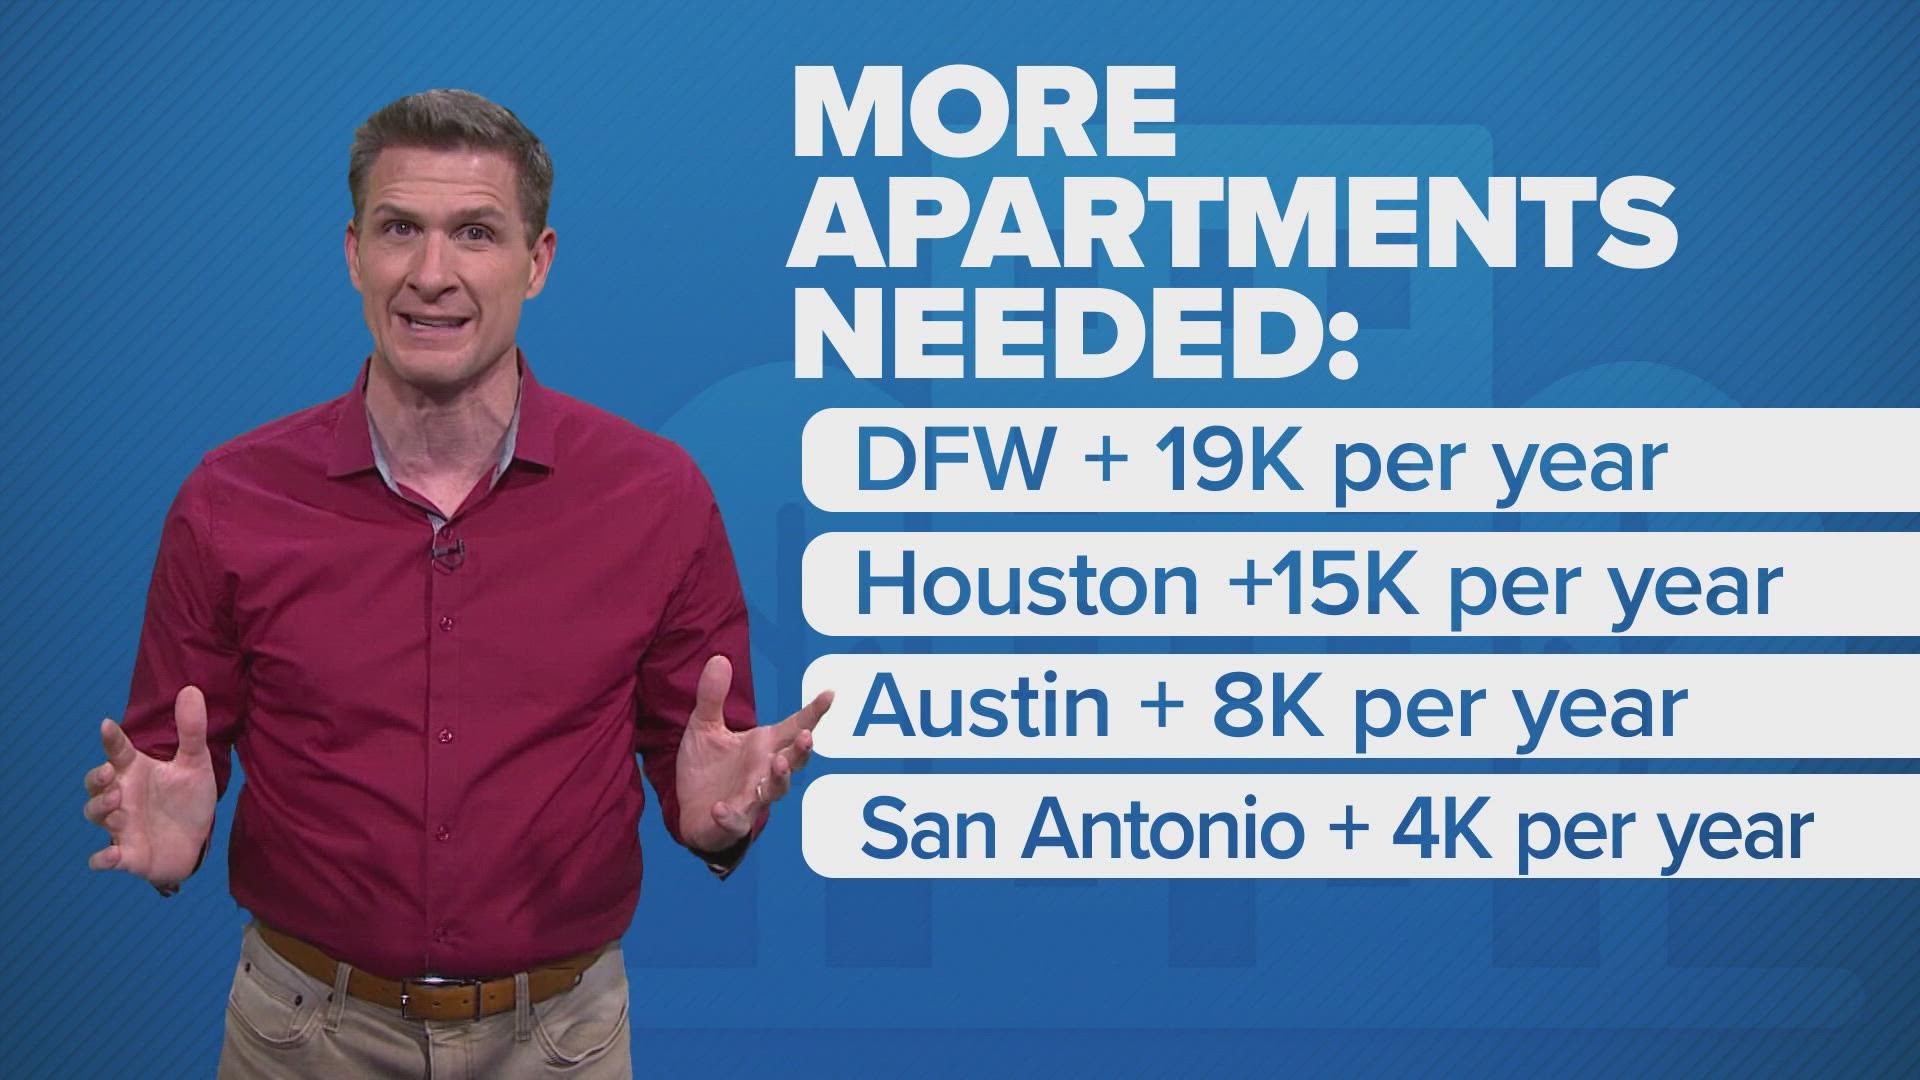 DFW is already home to the most apartment dwellers in Texas. Analysis shows the area needs 19,000 more each year to meet demand.